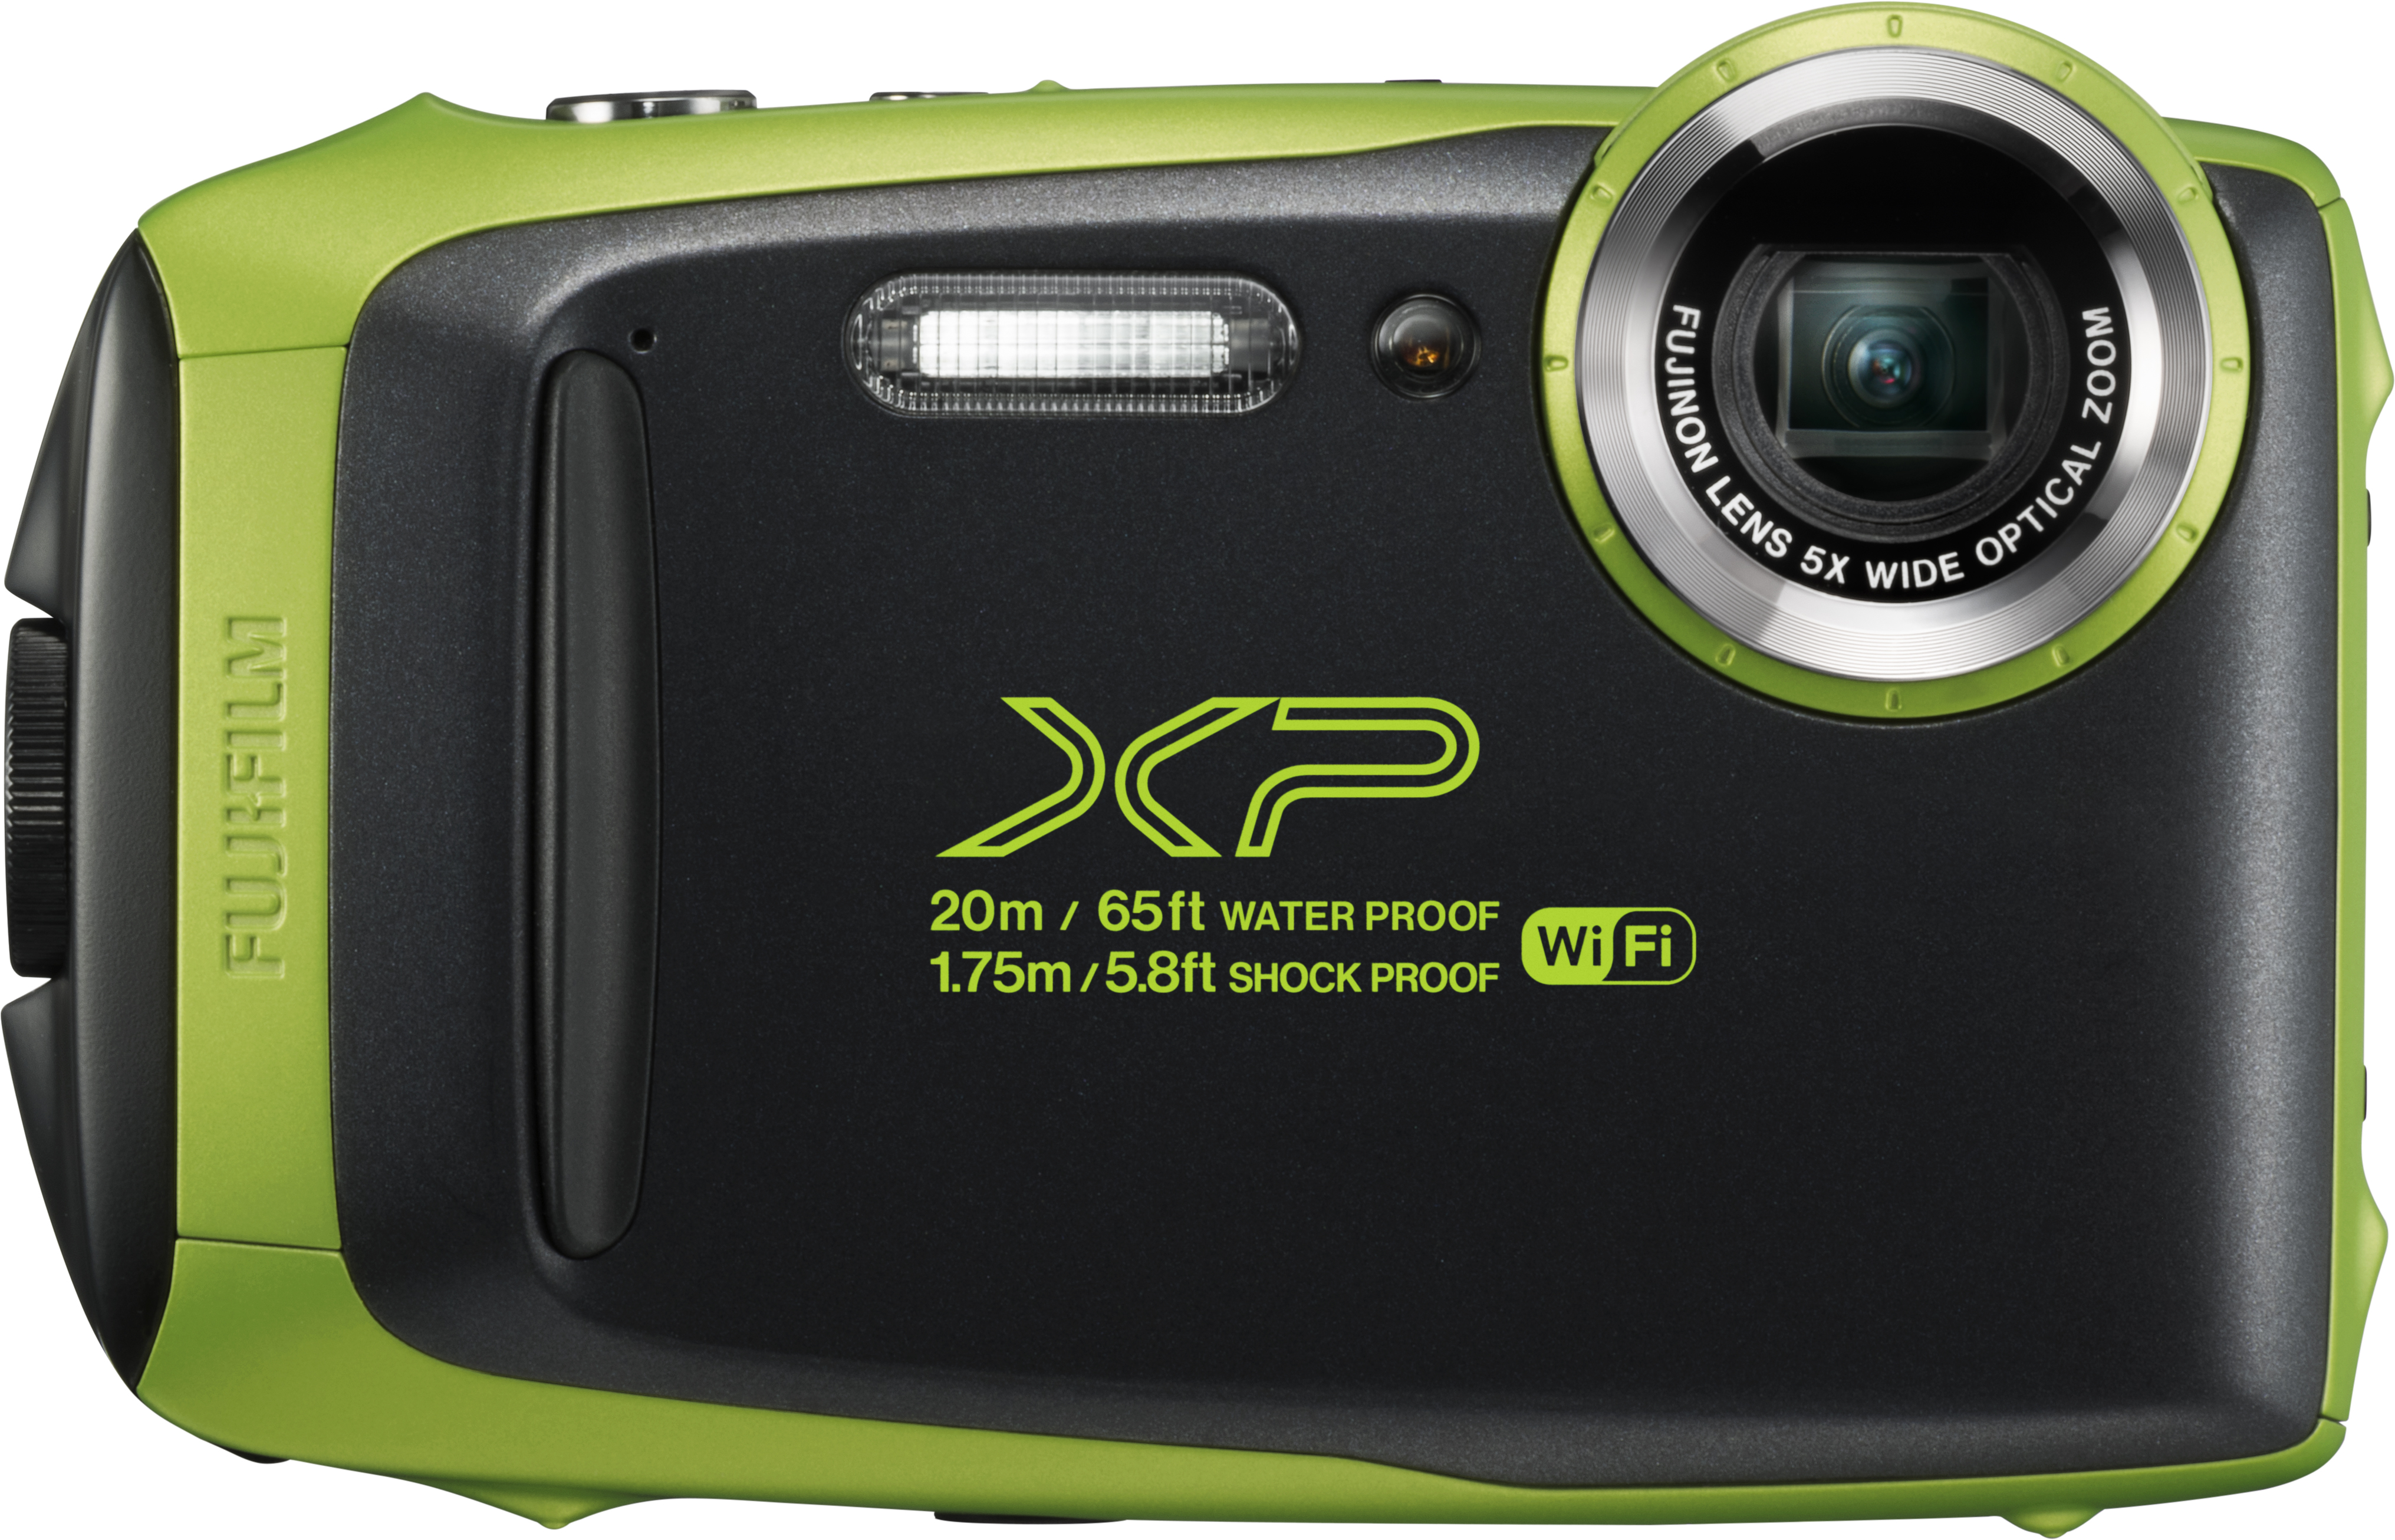 The New Fujifilm XP130 Can Work Underwater Down to 65 Feet